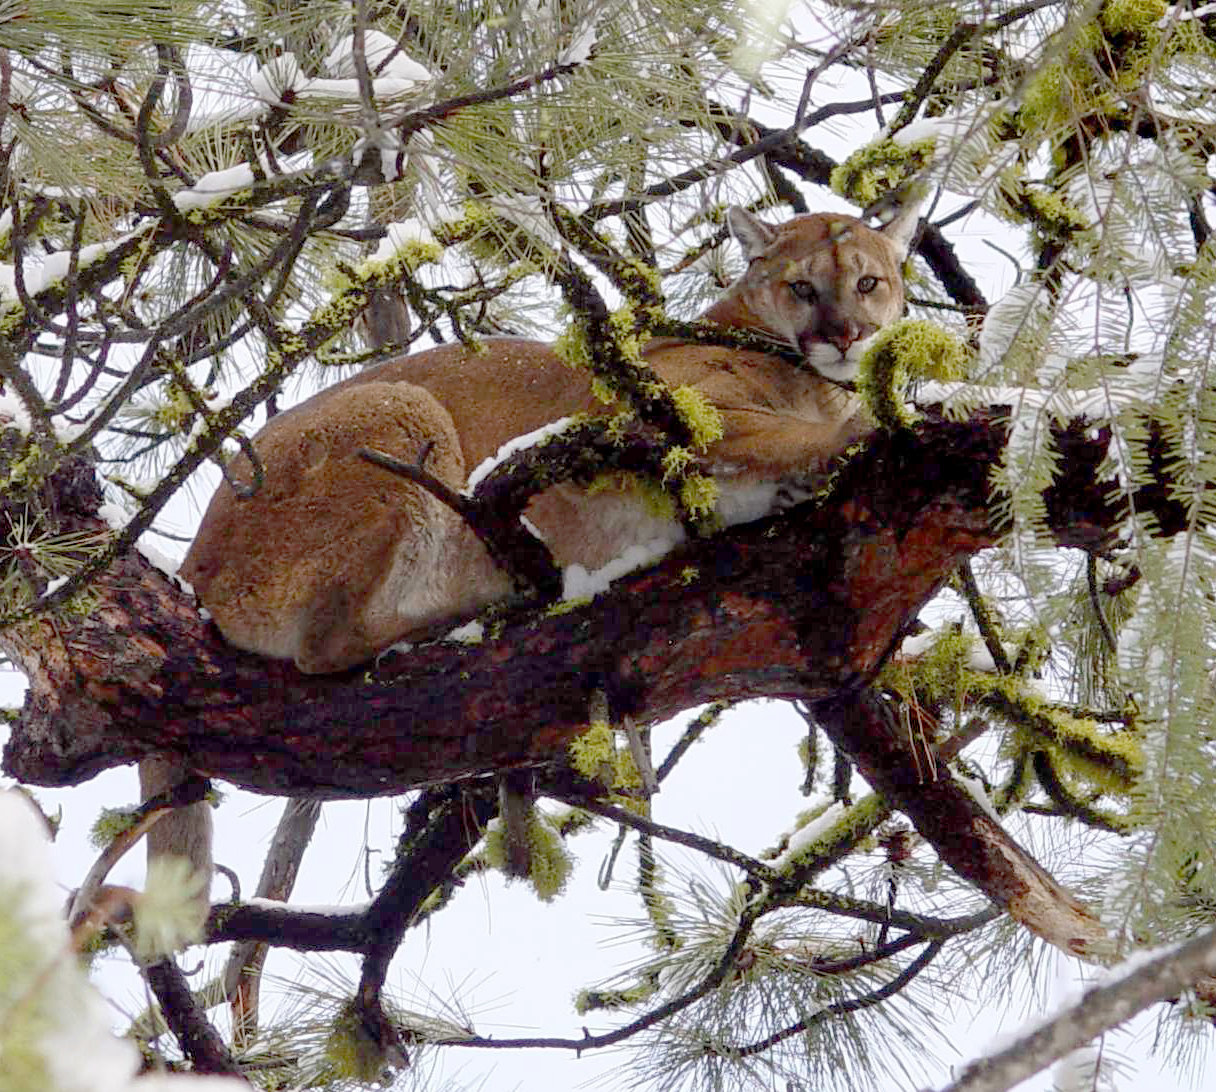 This photo of a cougar was provided by the Washington Department of Fish and Wildlife.